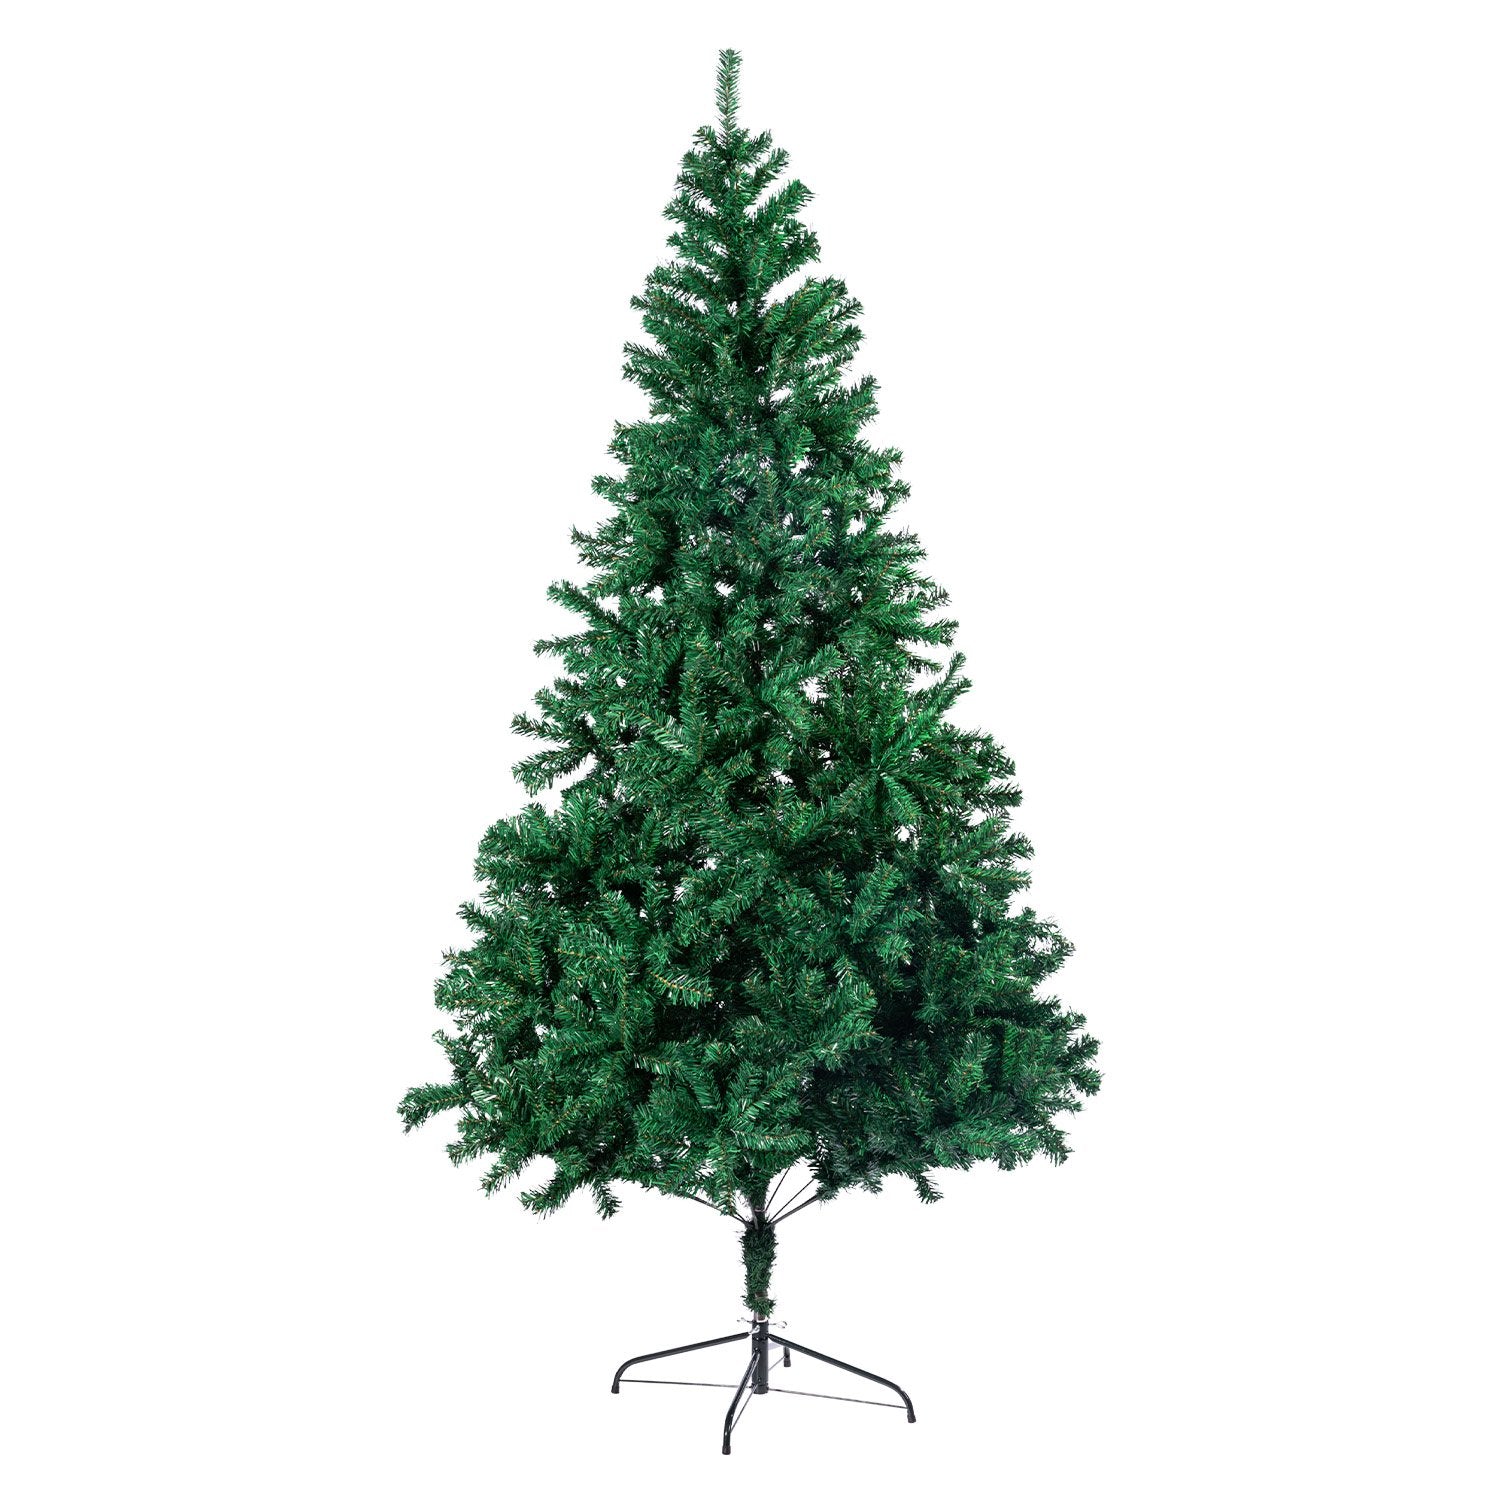 Christabelle Green Christmas Tree 2.1m Xmas Decor Decorations -1200 Tips - SILBERSHELL